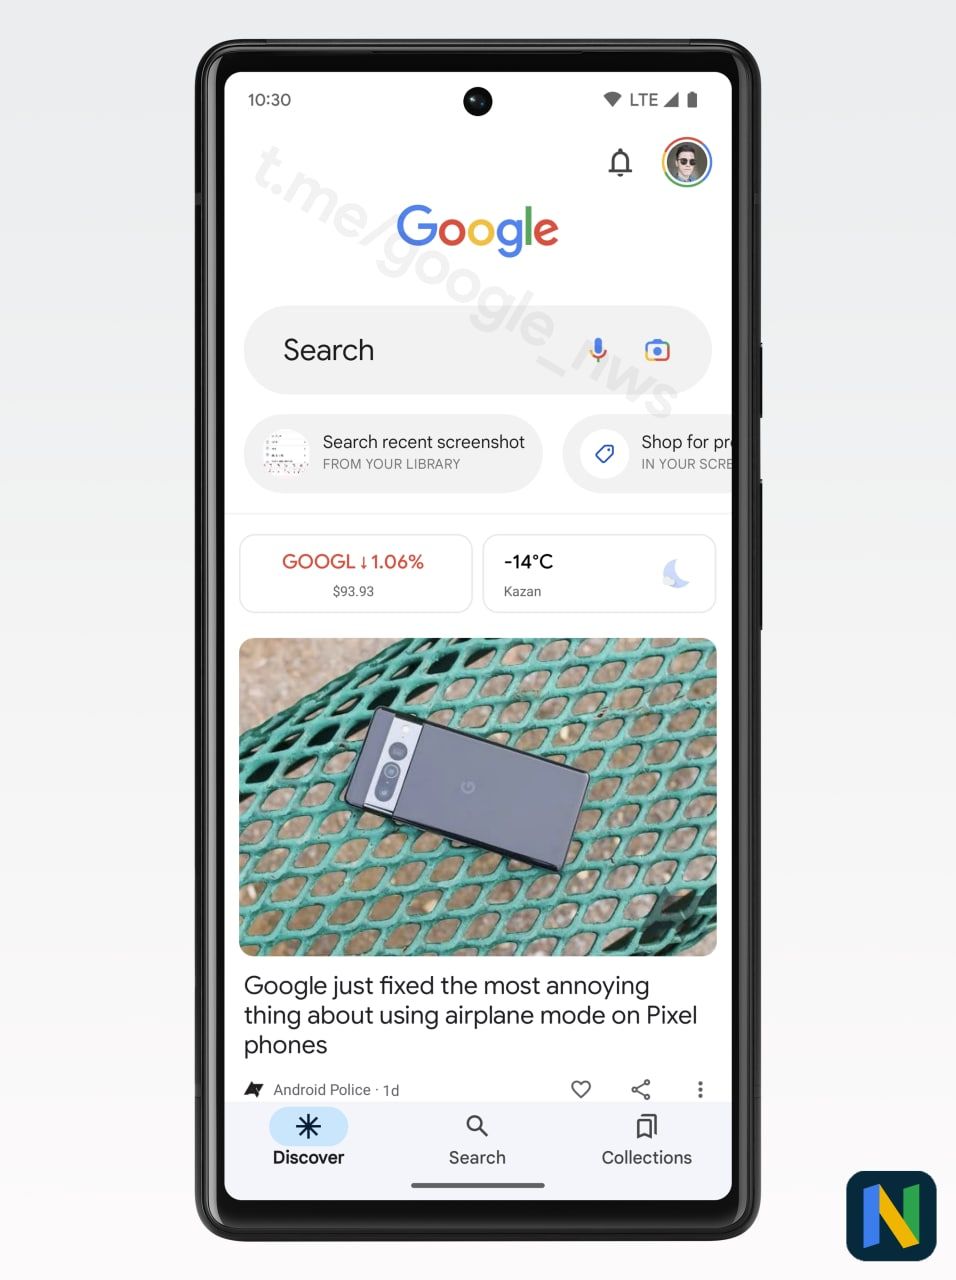 Google-Search-bar-redesign-2022-2-1